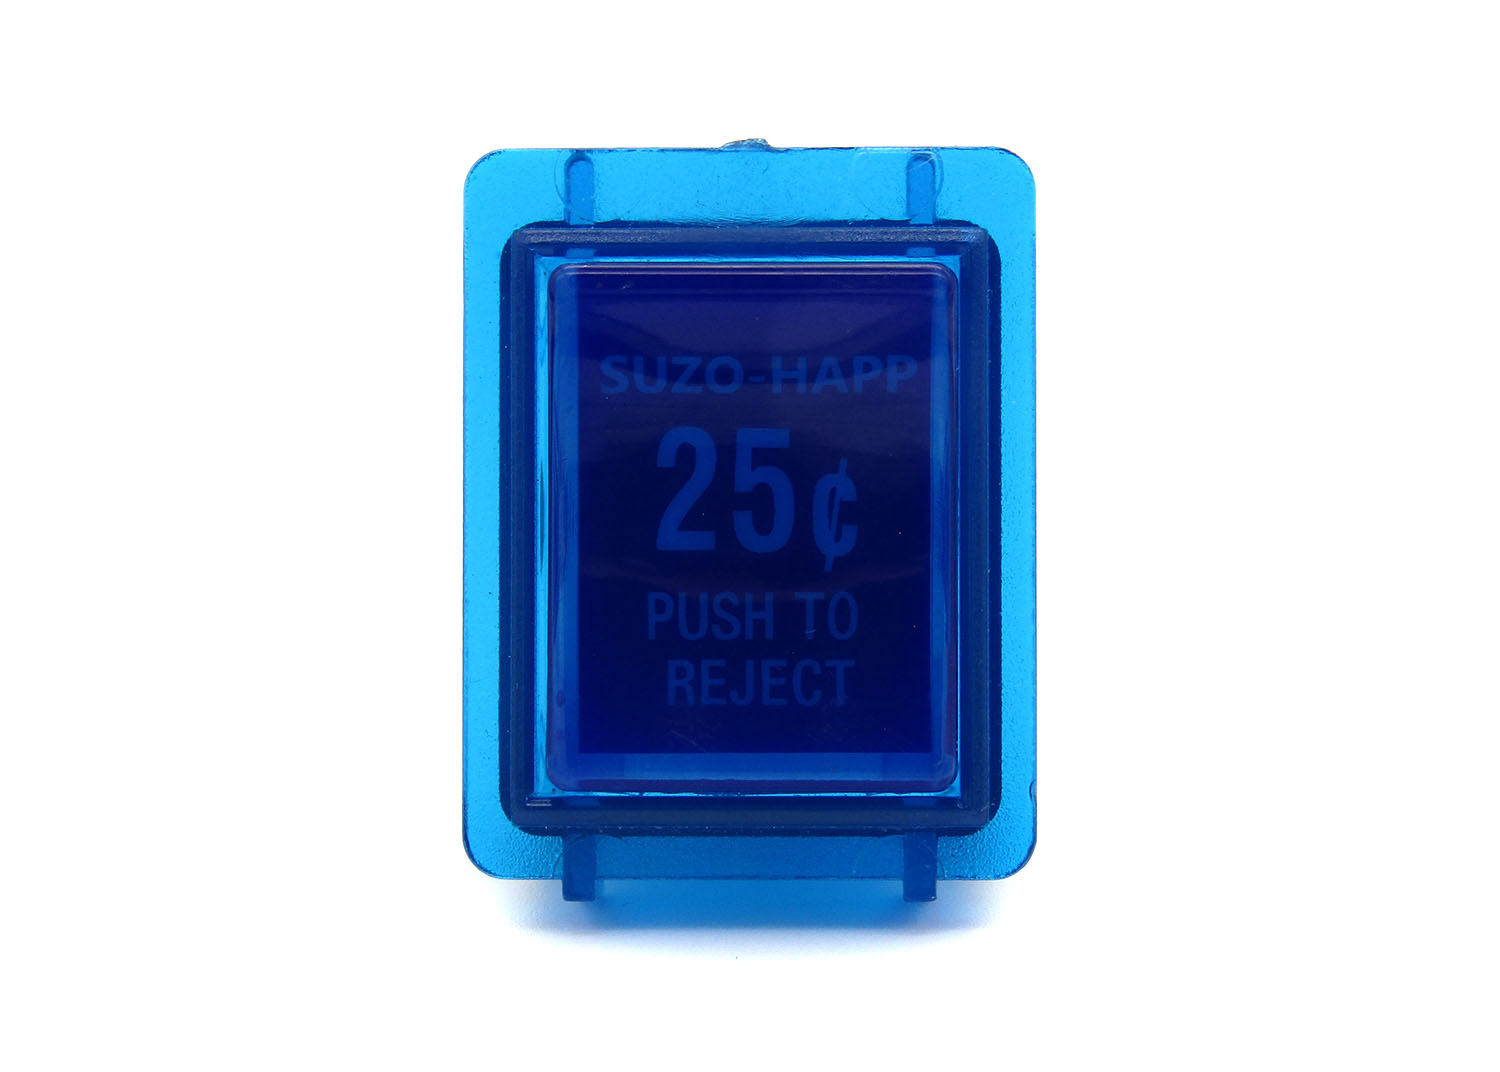 Suzo Happ 25c Push To Reject Button - Blue